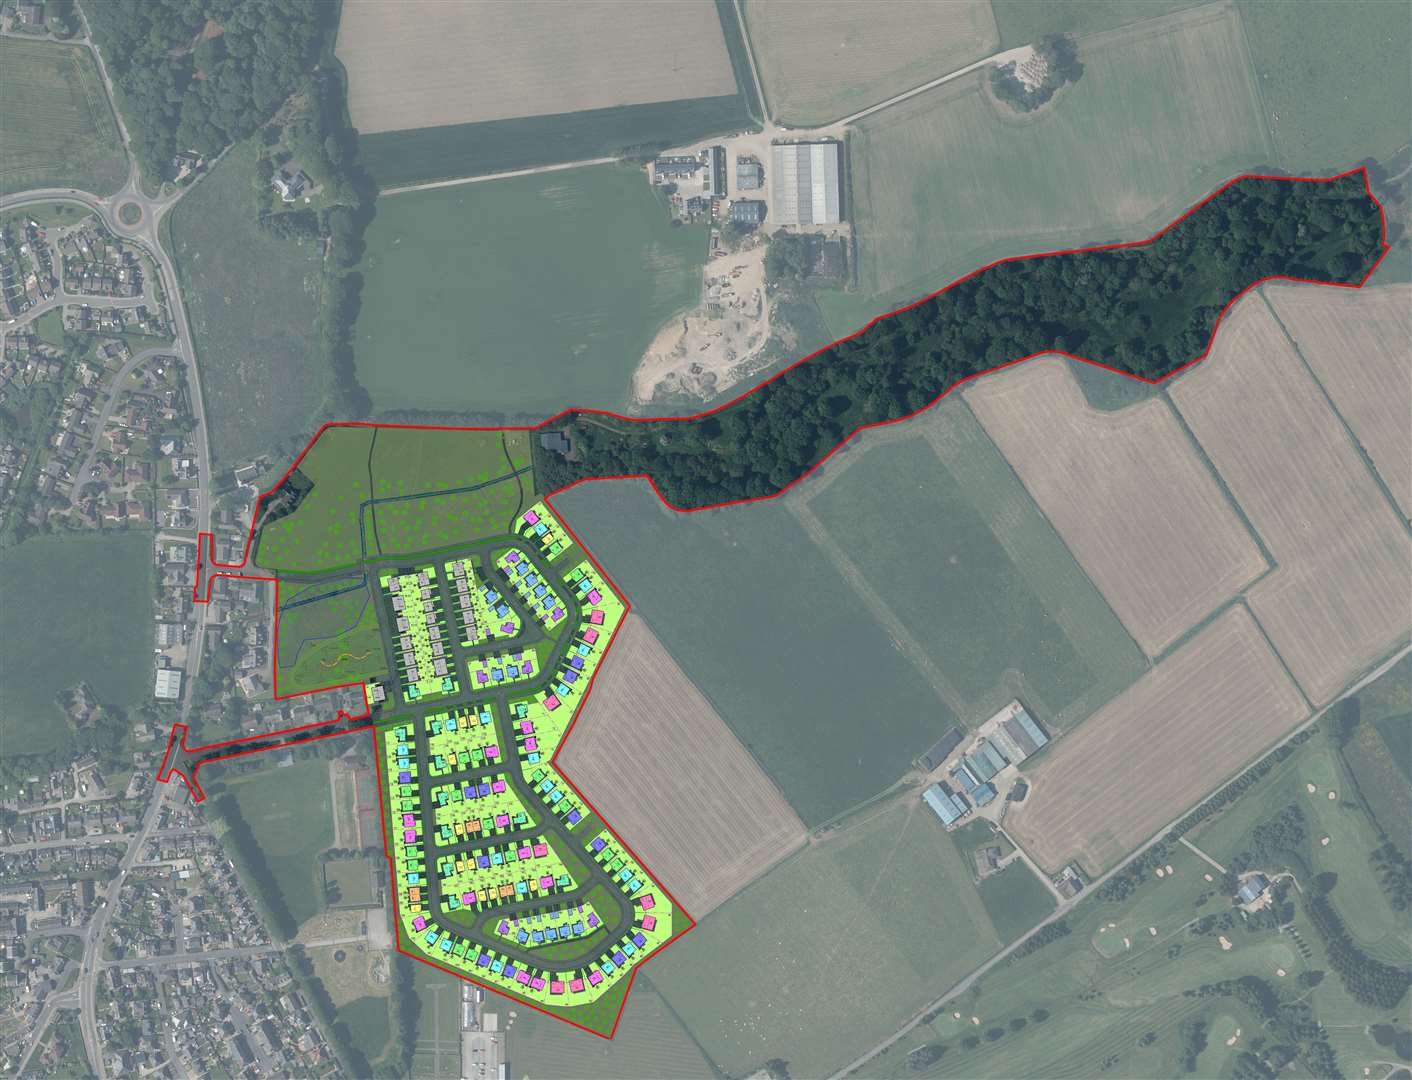 The plans for Newbarns were shown to residents